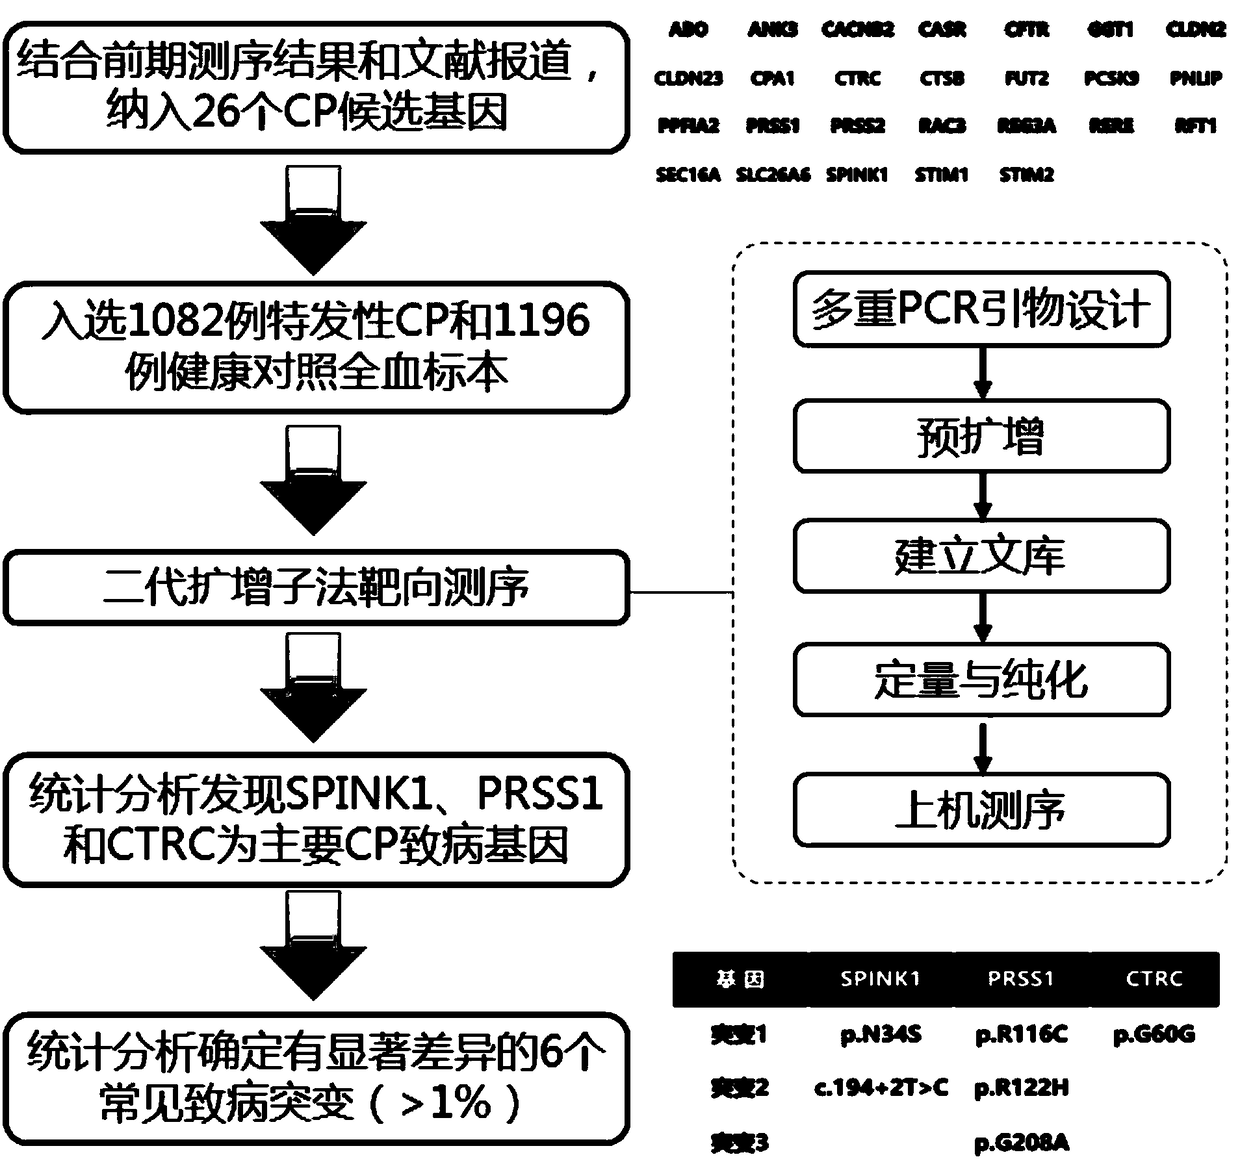 Application of set of gene mutation sites in preparation of reagent or kit for diagnosing chronic pancreatitis (CP) and evaluating prognosis